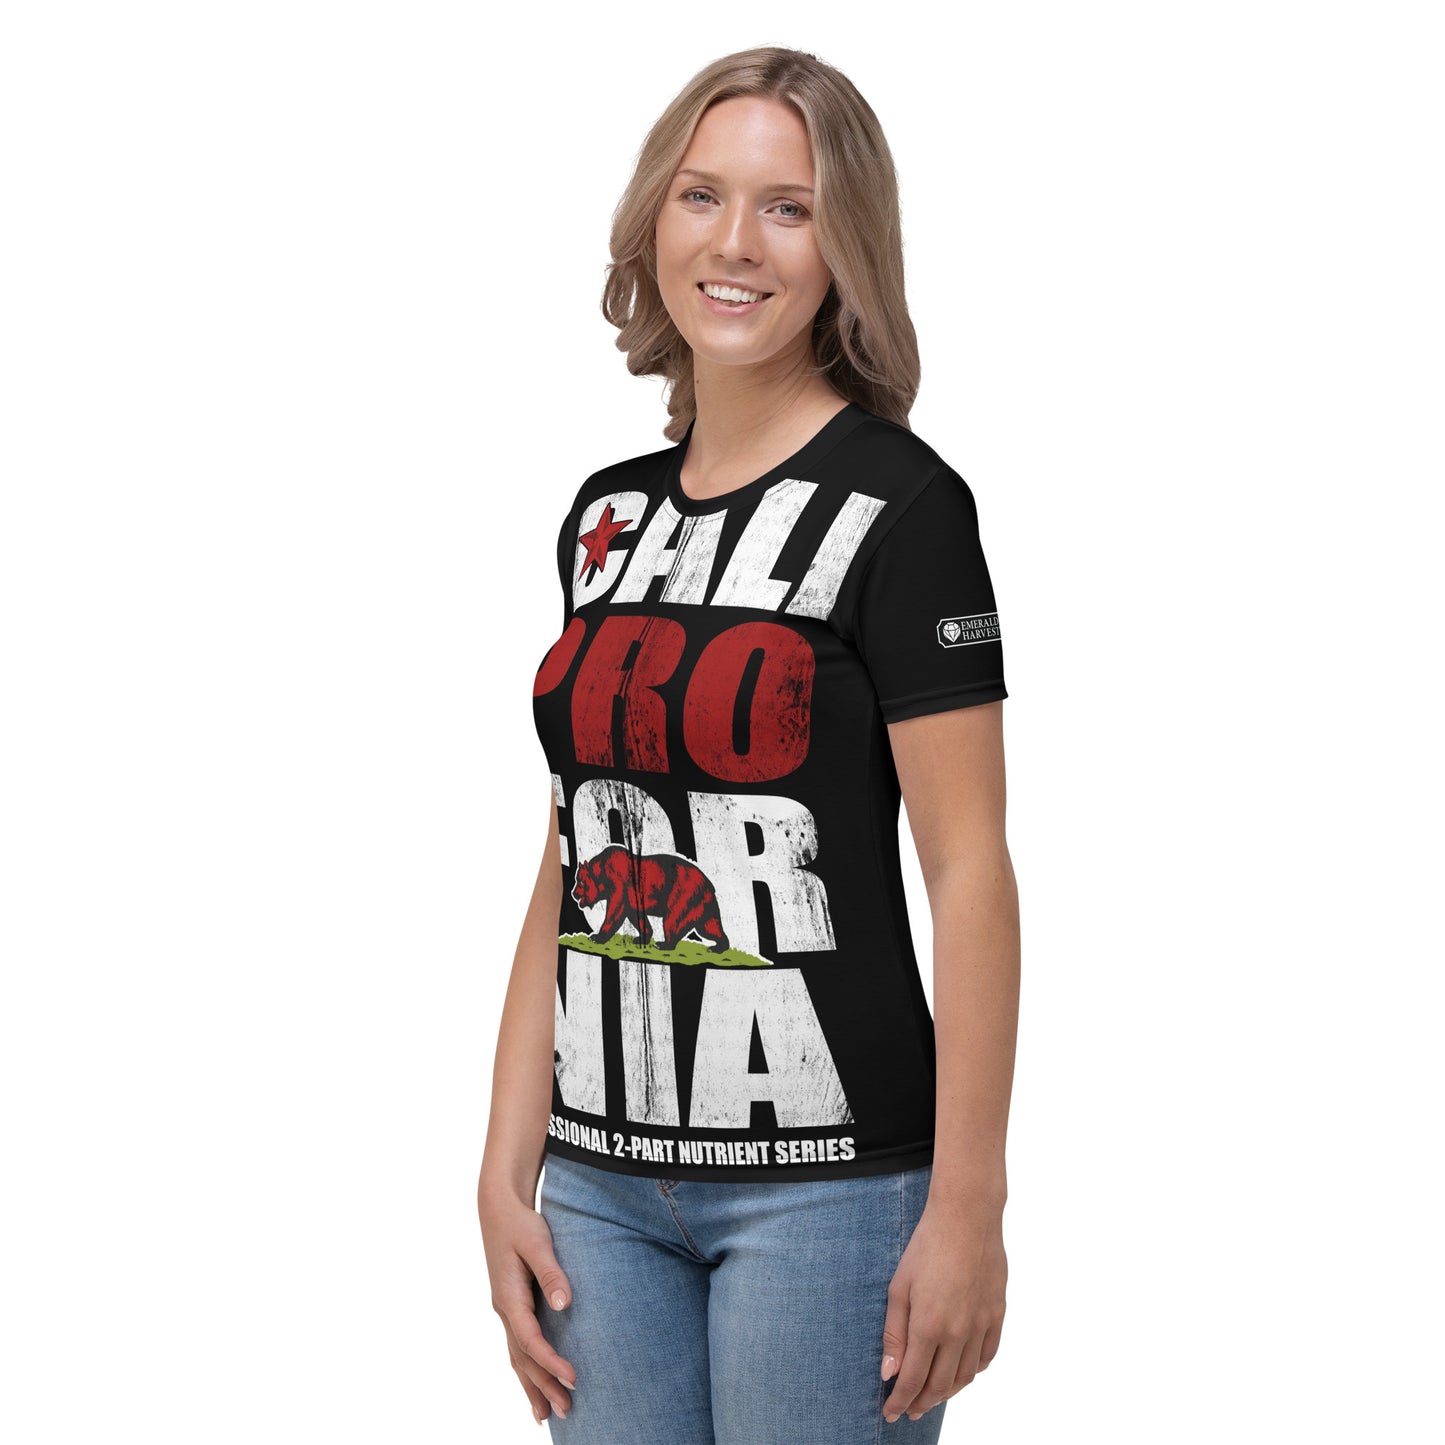 Cali Pro Fornia All-Over Print Women's Crew Neck T-Shirt